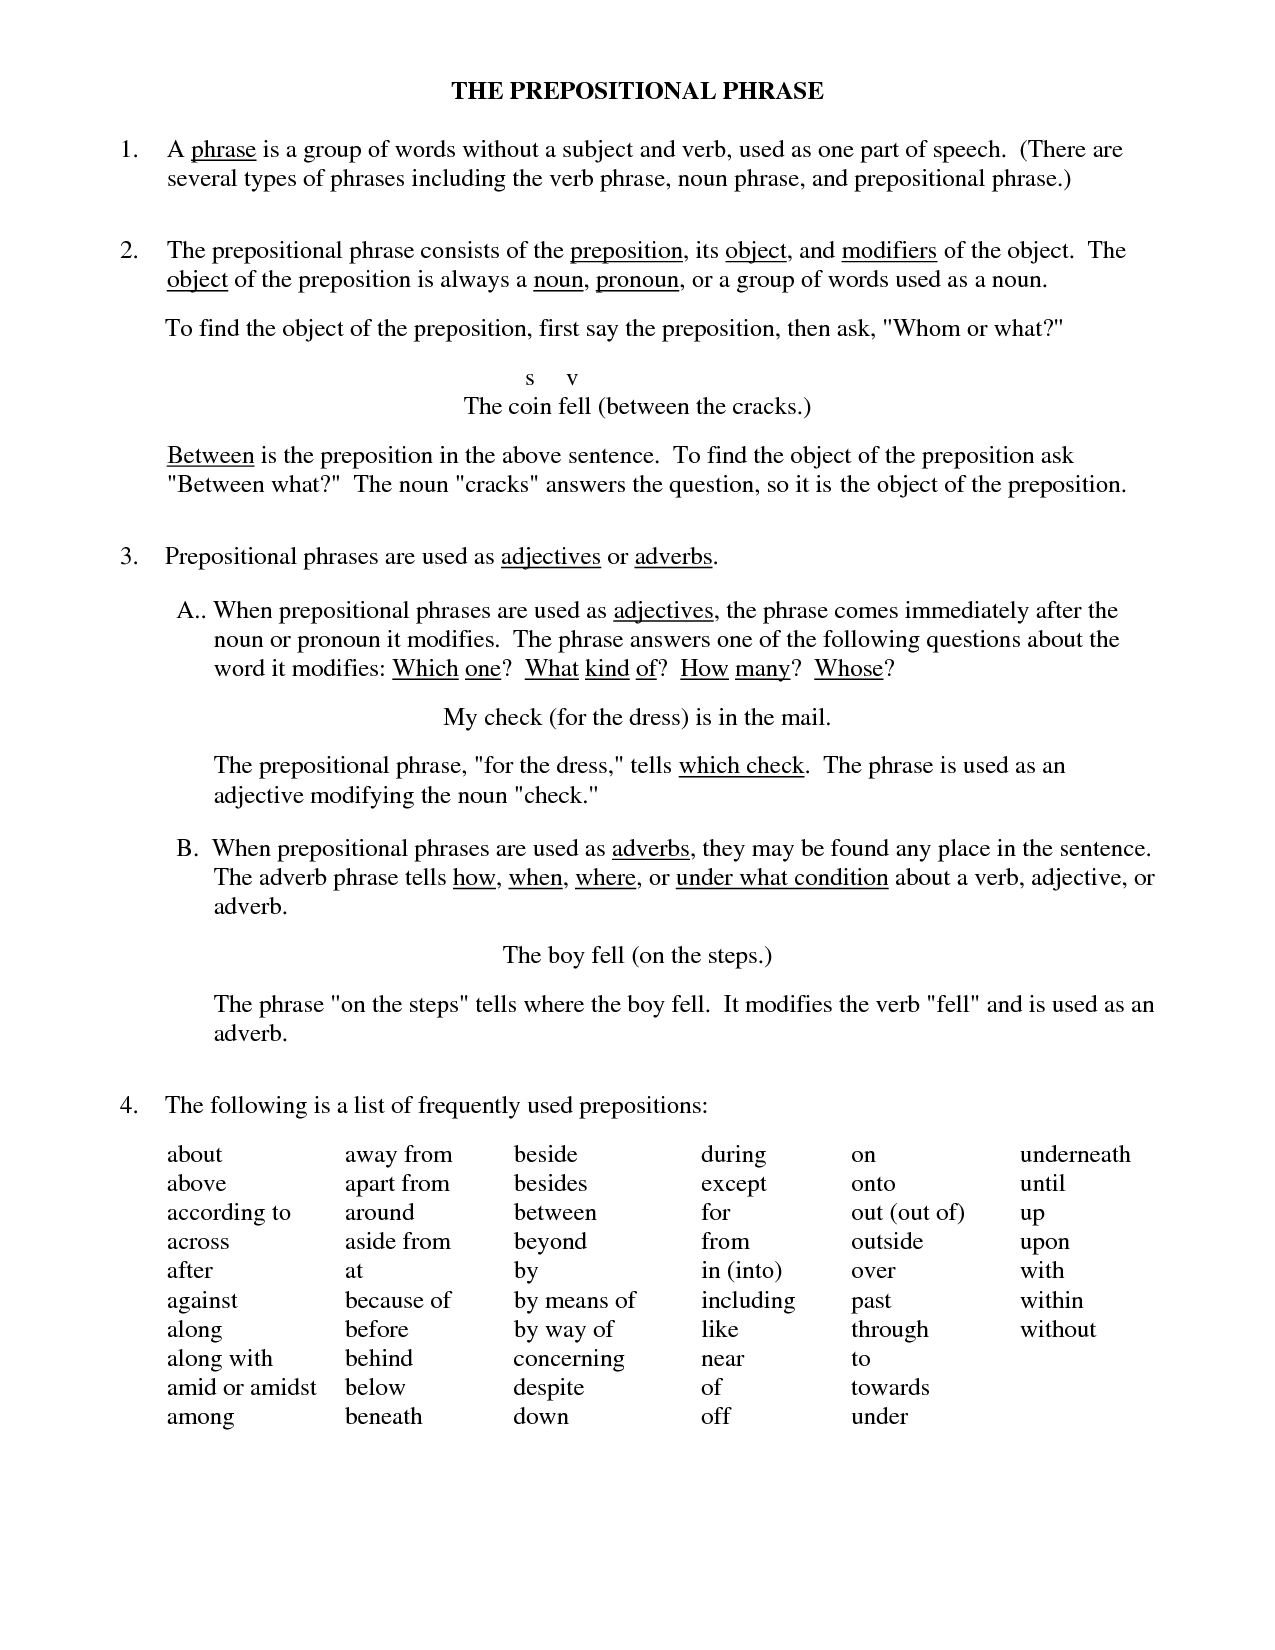 14-best-images-of-prepositional-phrases-worksheets-prepositions-and-prepositional-phrases